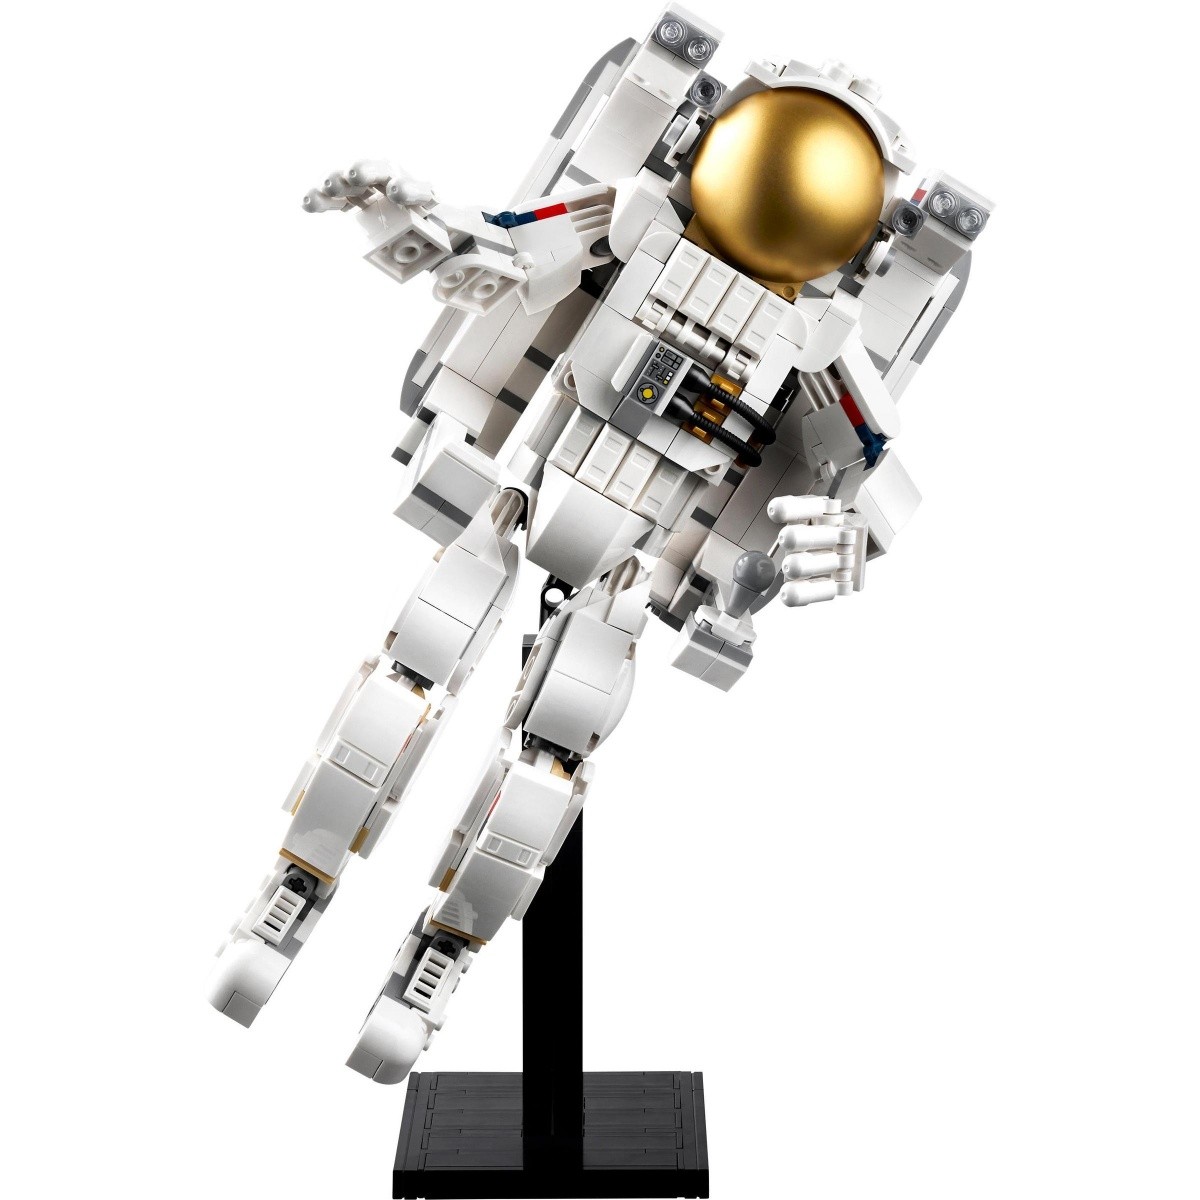 LEGO 31152 Creator 3in1 Space Astronaut Figure Toy with Dog at